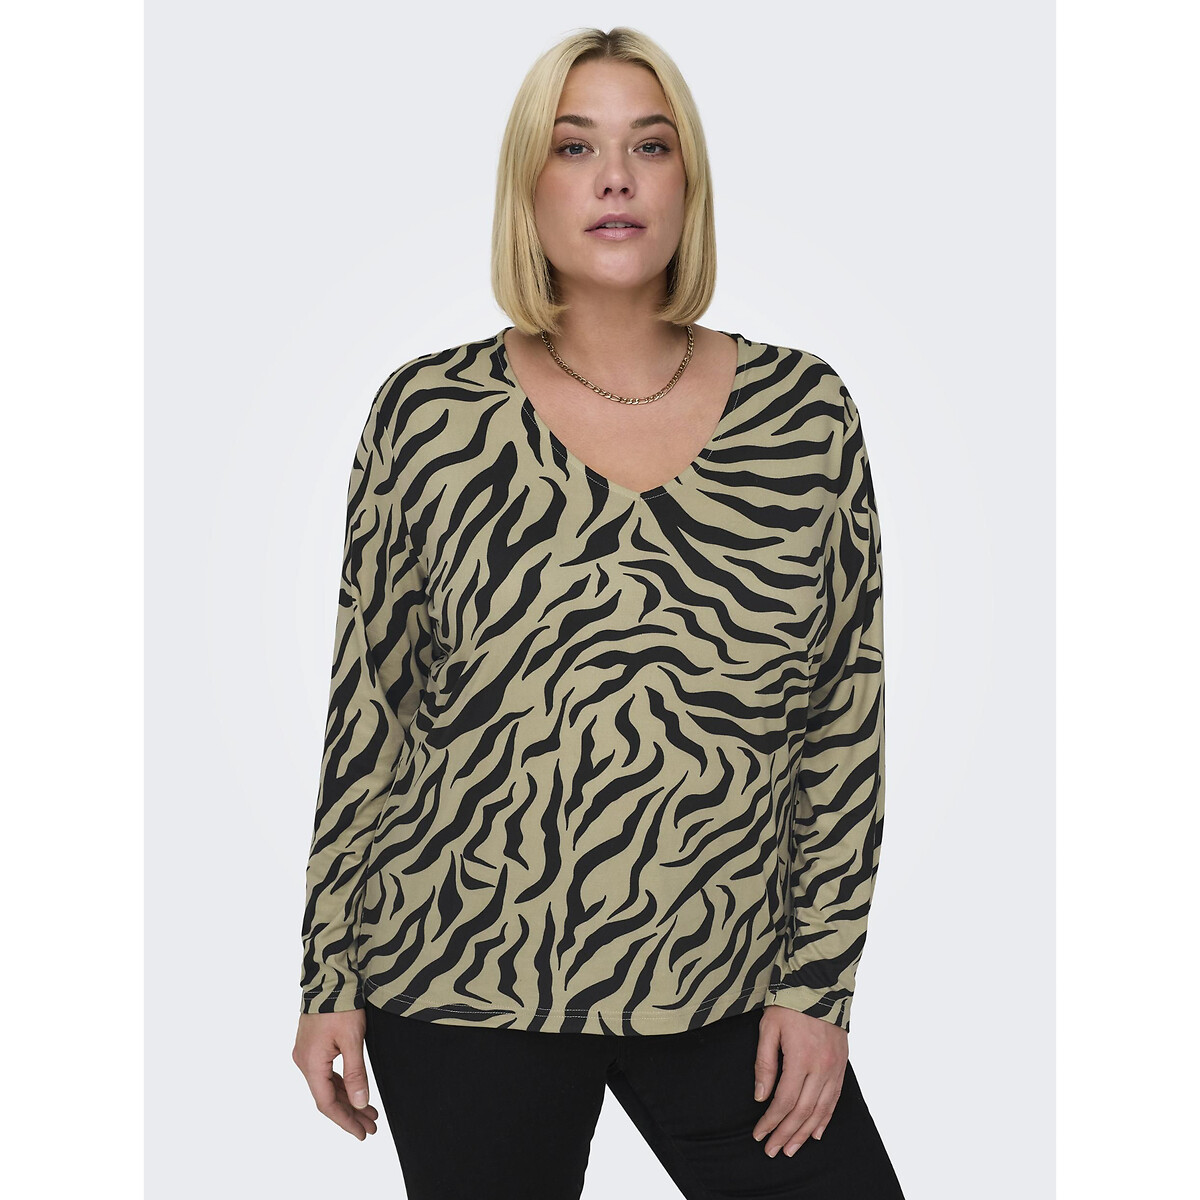 Zebra Print Blouse with Long Sleeves